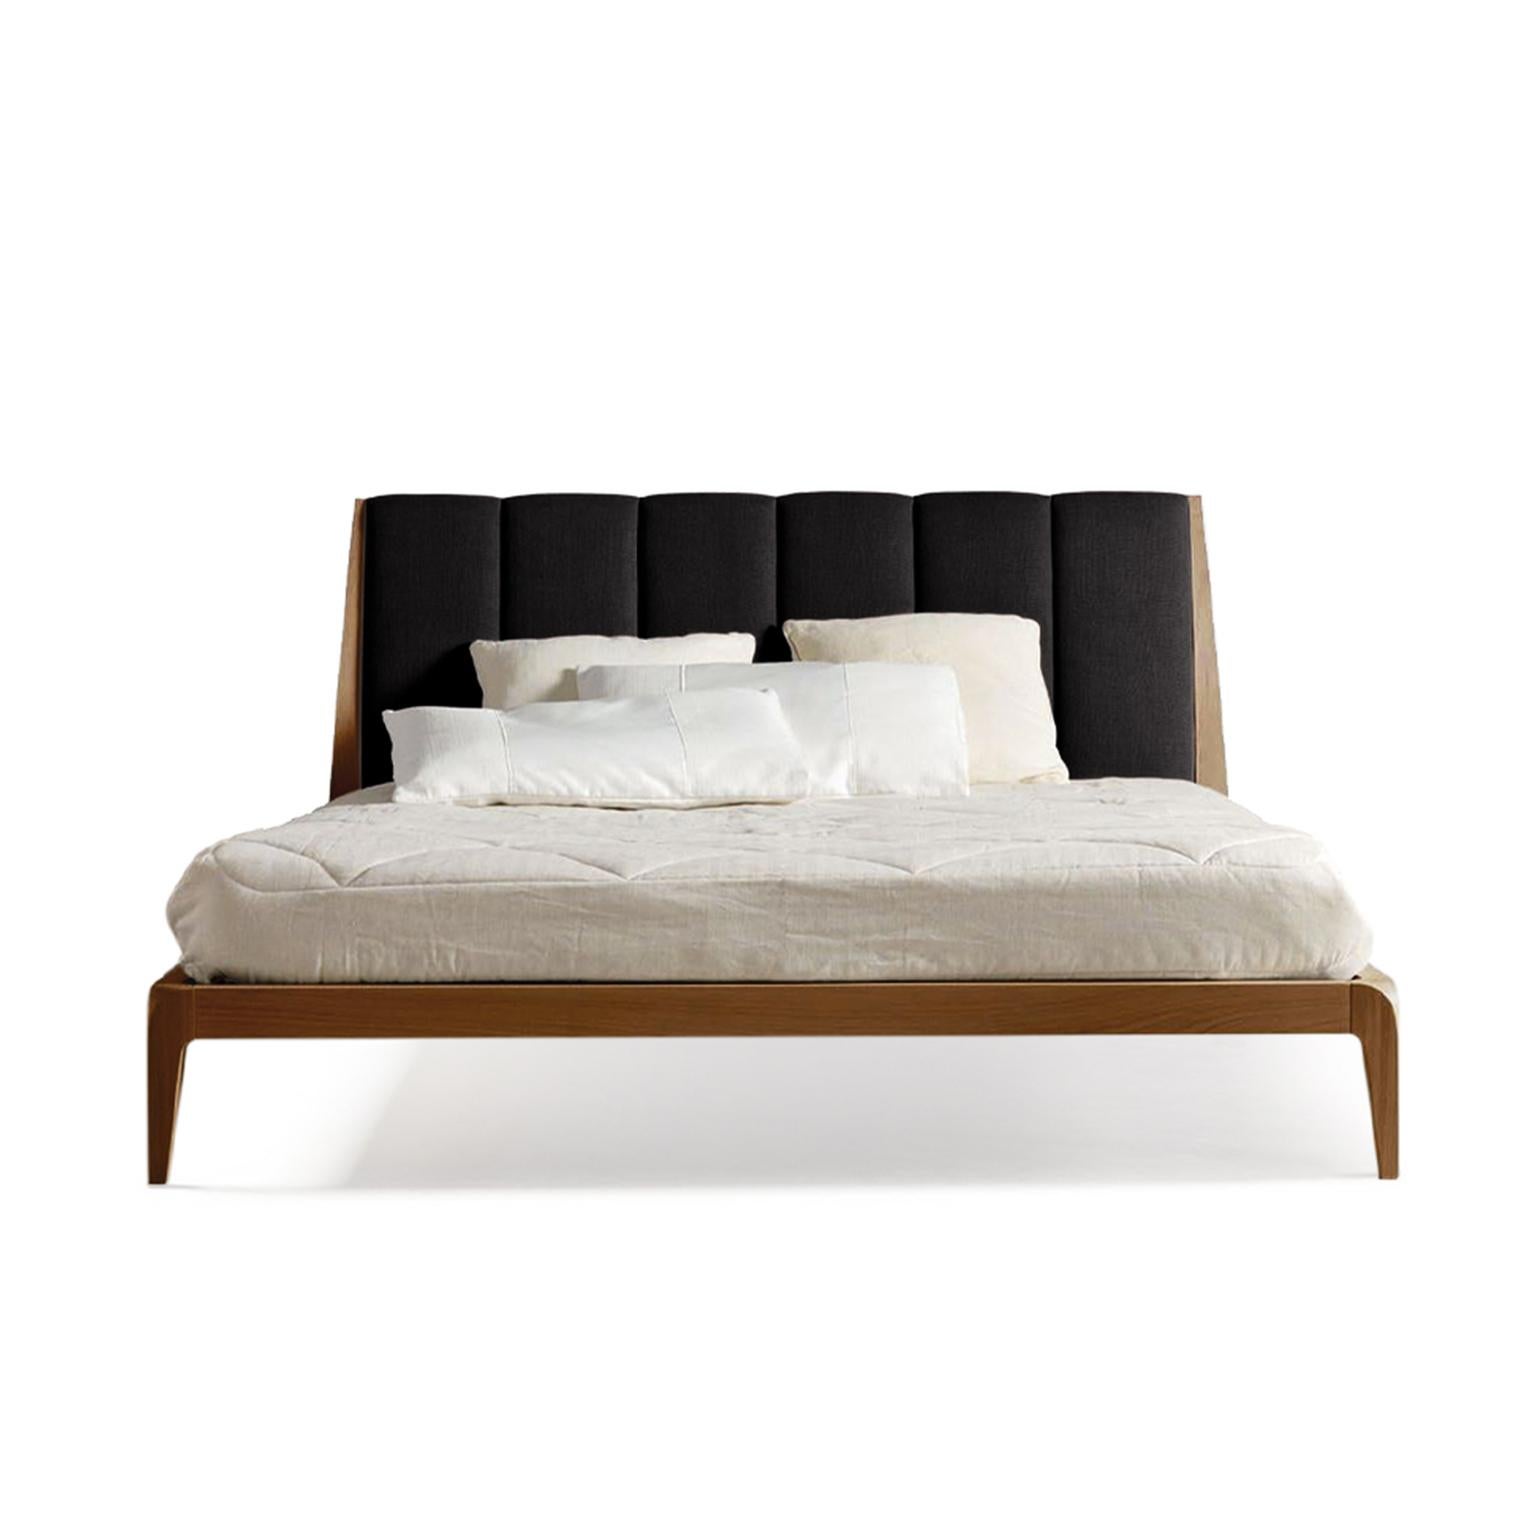 Oiled Verso Nord Solid Wood Bed, Walnut in Hand-Made Natural Finish, Contemporary For Sale